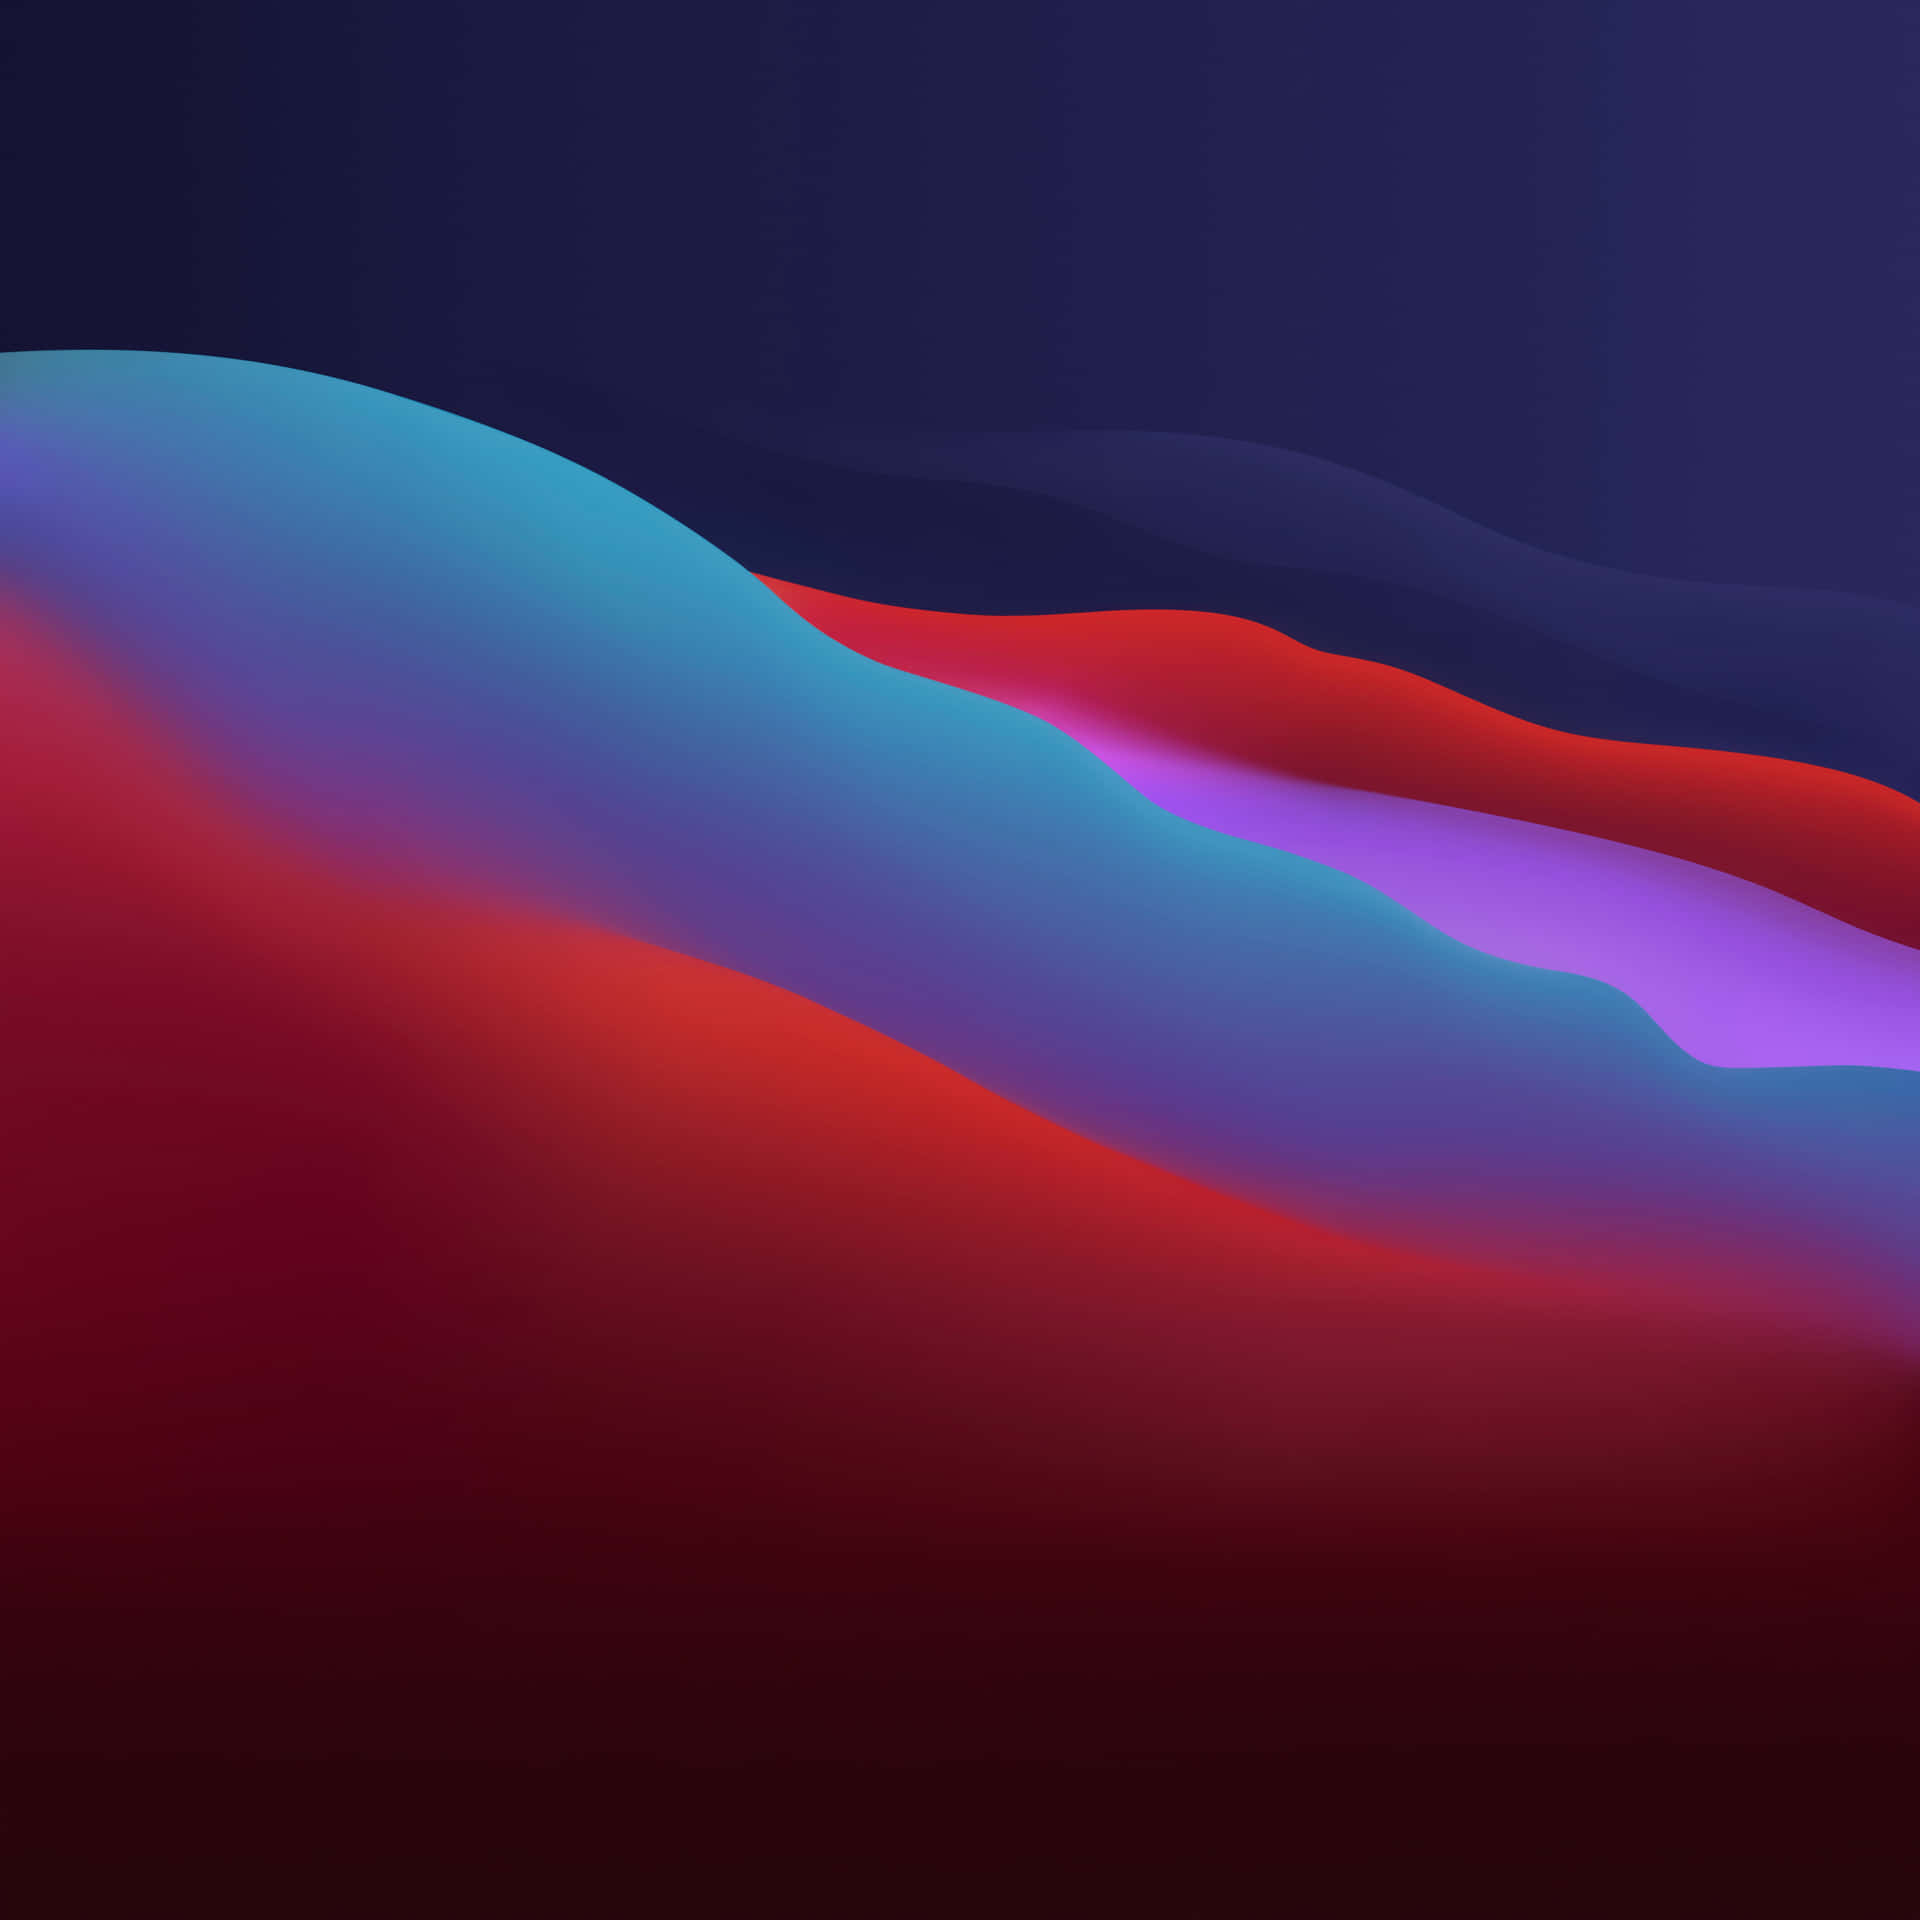 A Red, Blue, And Purple Abstract Background Wallpaper